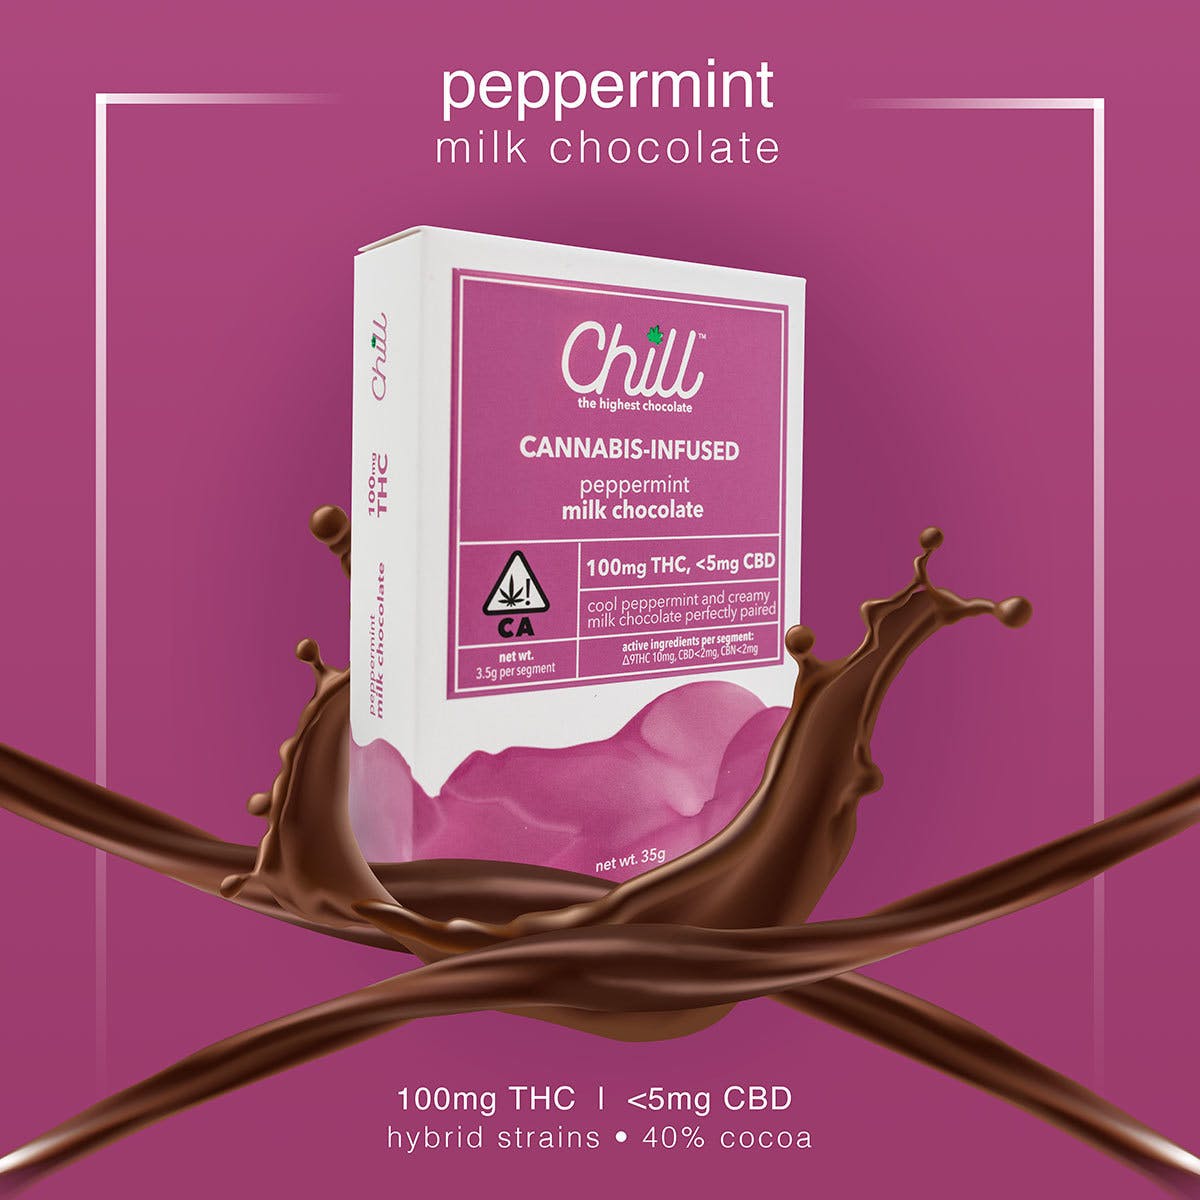 edible-chill-pepppermint-milk-chocolate